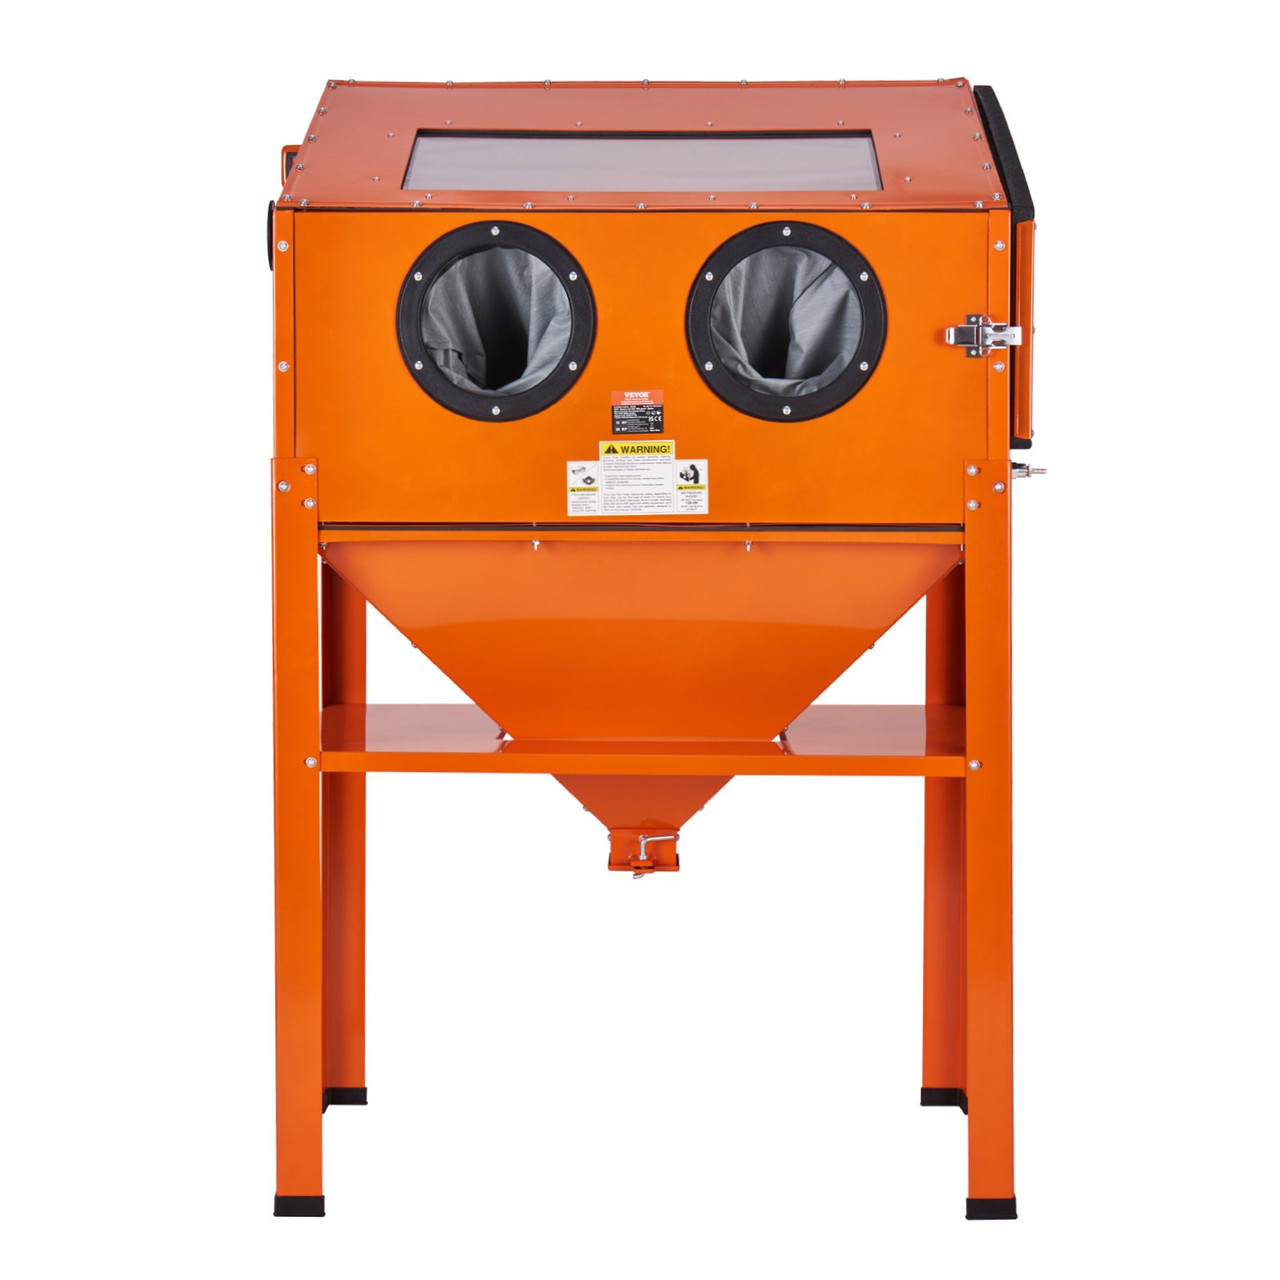 VEVOR 60 Gallon Sandblasting Cabinet, 40-120PSI Sand Blasting Cabinet with Stand, Heavy Duty Steel Sand Blaster with Blasting Gun & 4 Ceramic Nozzles for Paint, Stain, Rust Removal